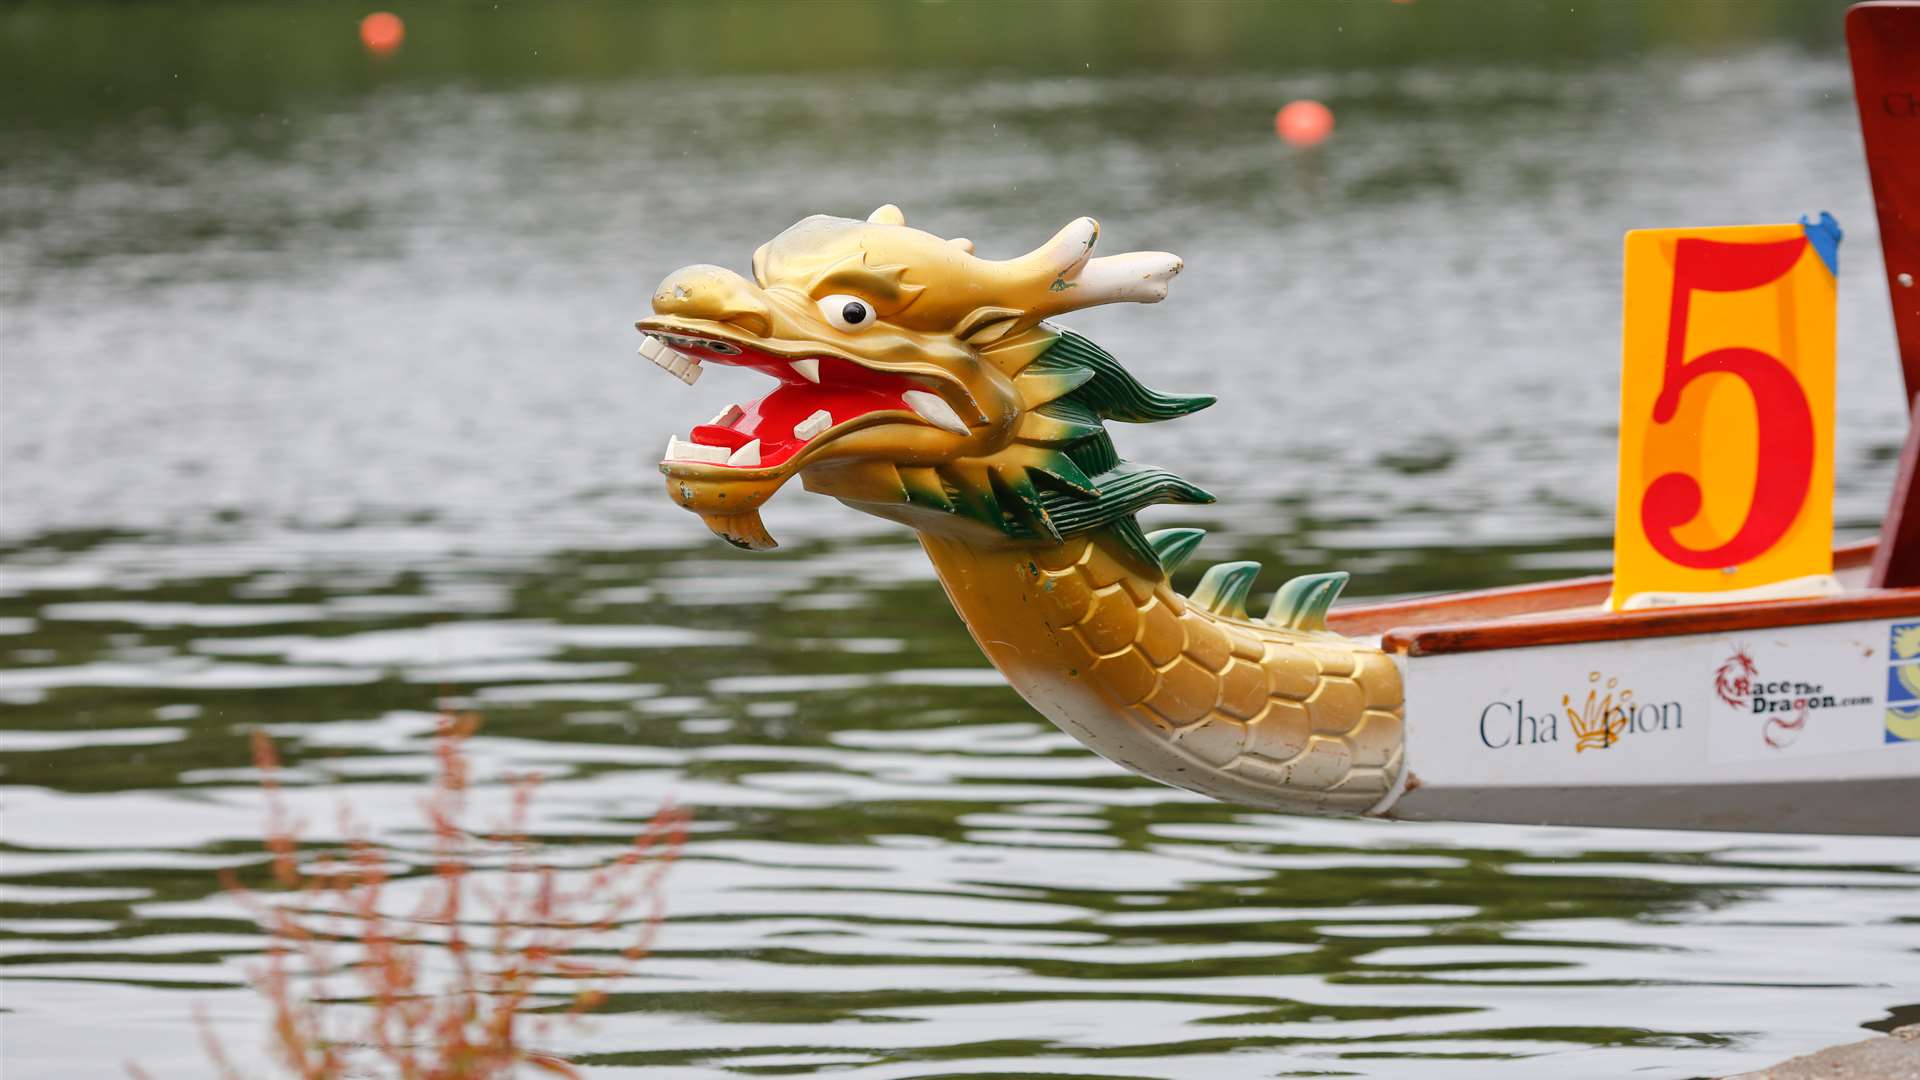 Spectators can watch for free at the KM Dragon Boat Race 2017 at Mote Park, Maidstone on July 2.